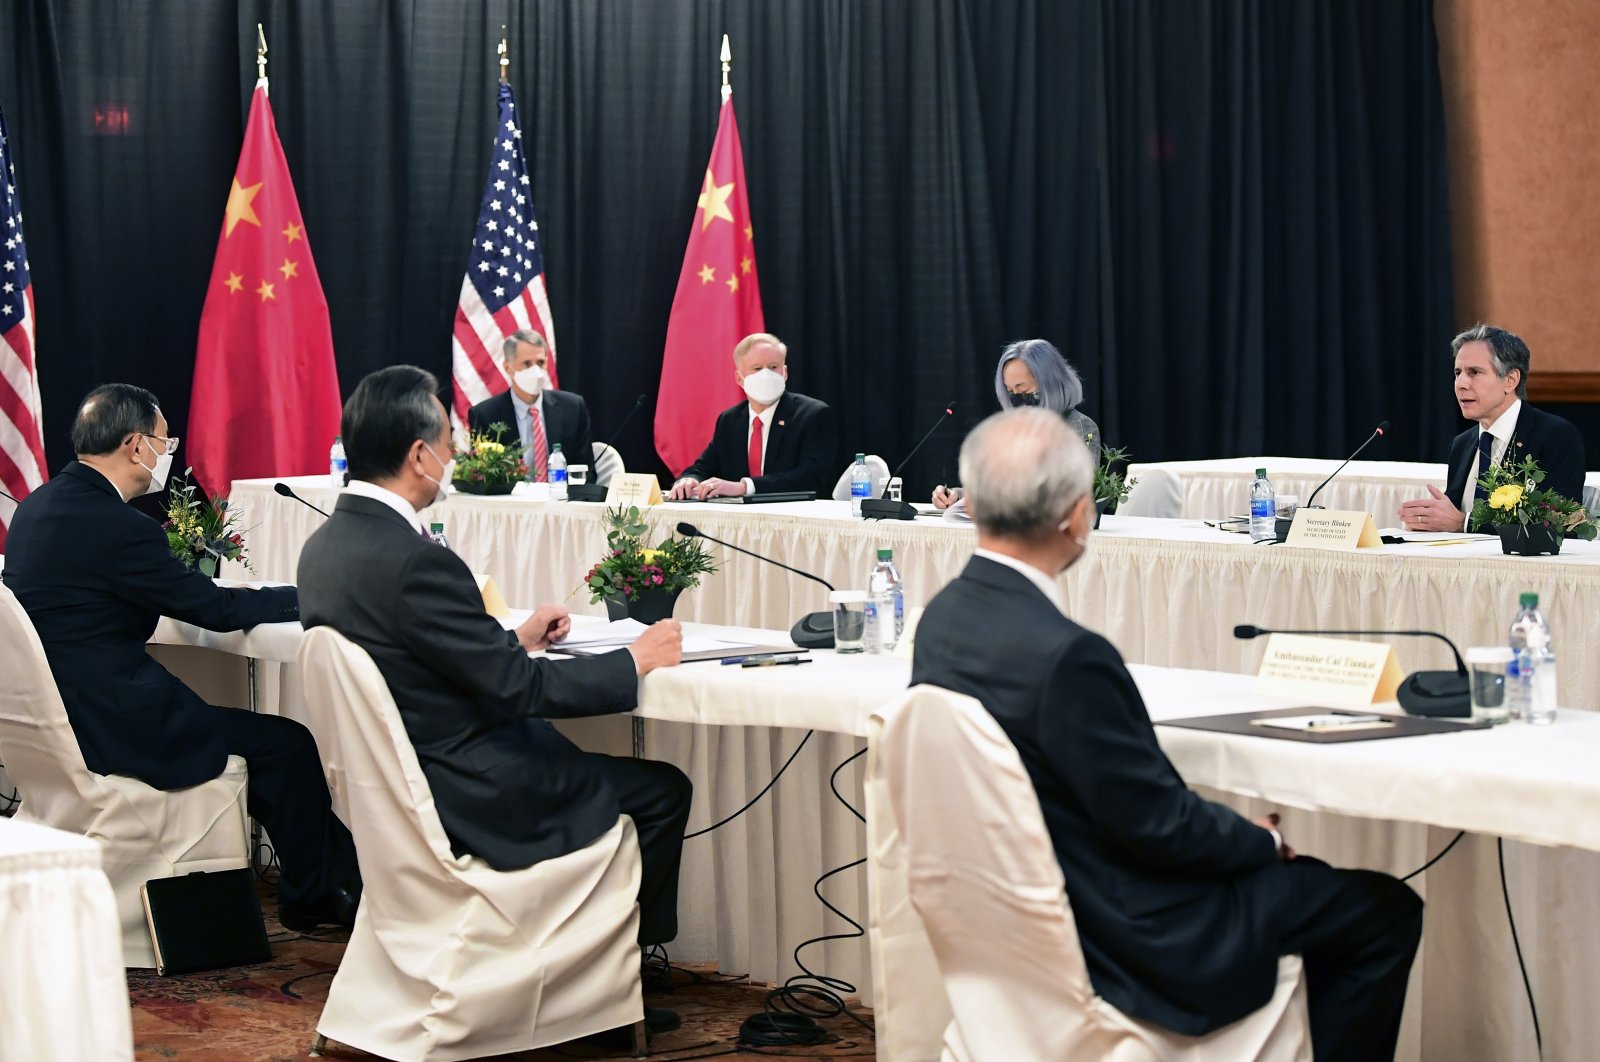 Secretary of State Antony Blinken, speaks as Chinese Communist Party foreign affairs chief Yang Jiechi, left, and China's State Councilor Wang Yi, second from left, listen at the opening session of U.S.-China talks at the Captain Cook Hotel in Anchorage, Alaska, Thursday, March 18, 2021. (AP Photo)